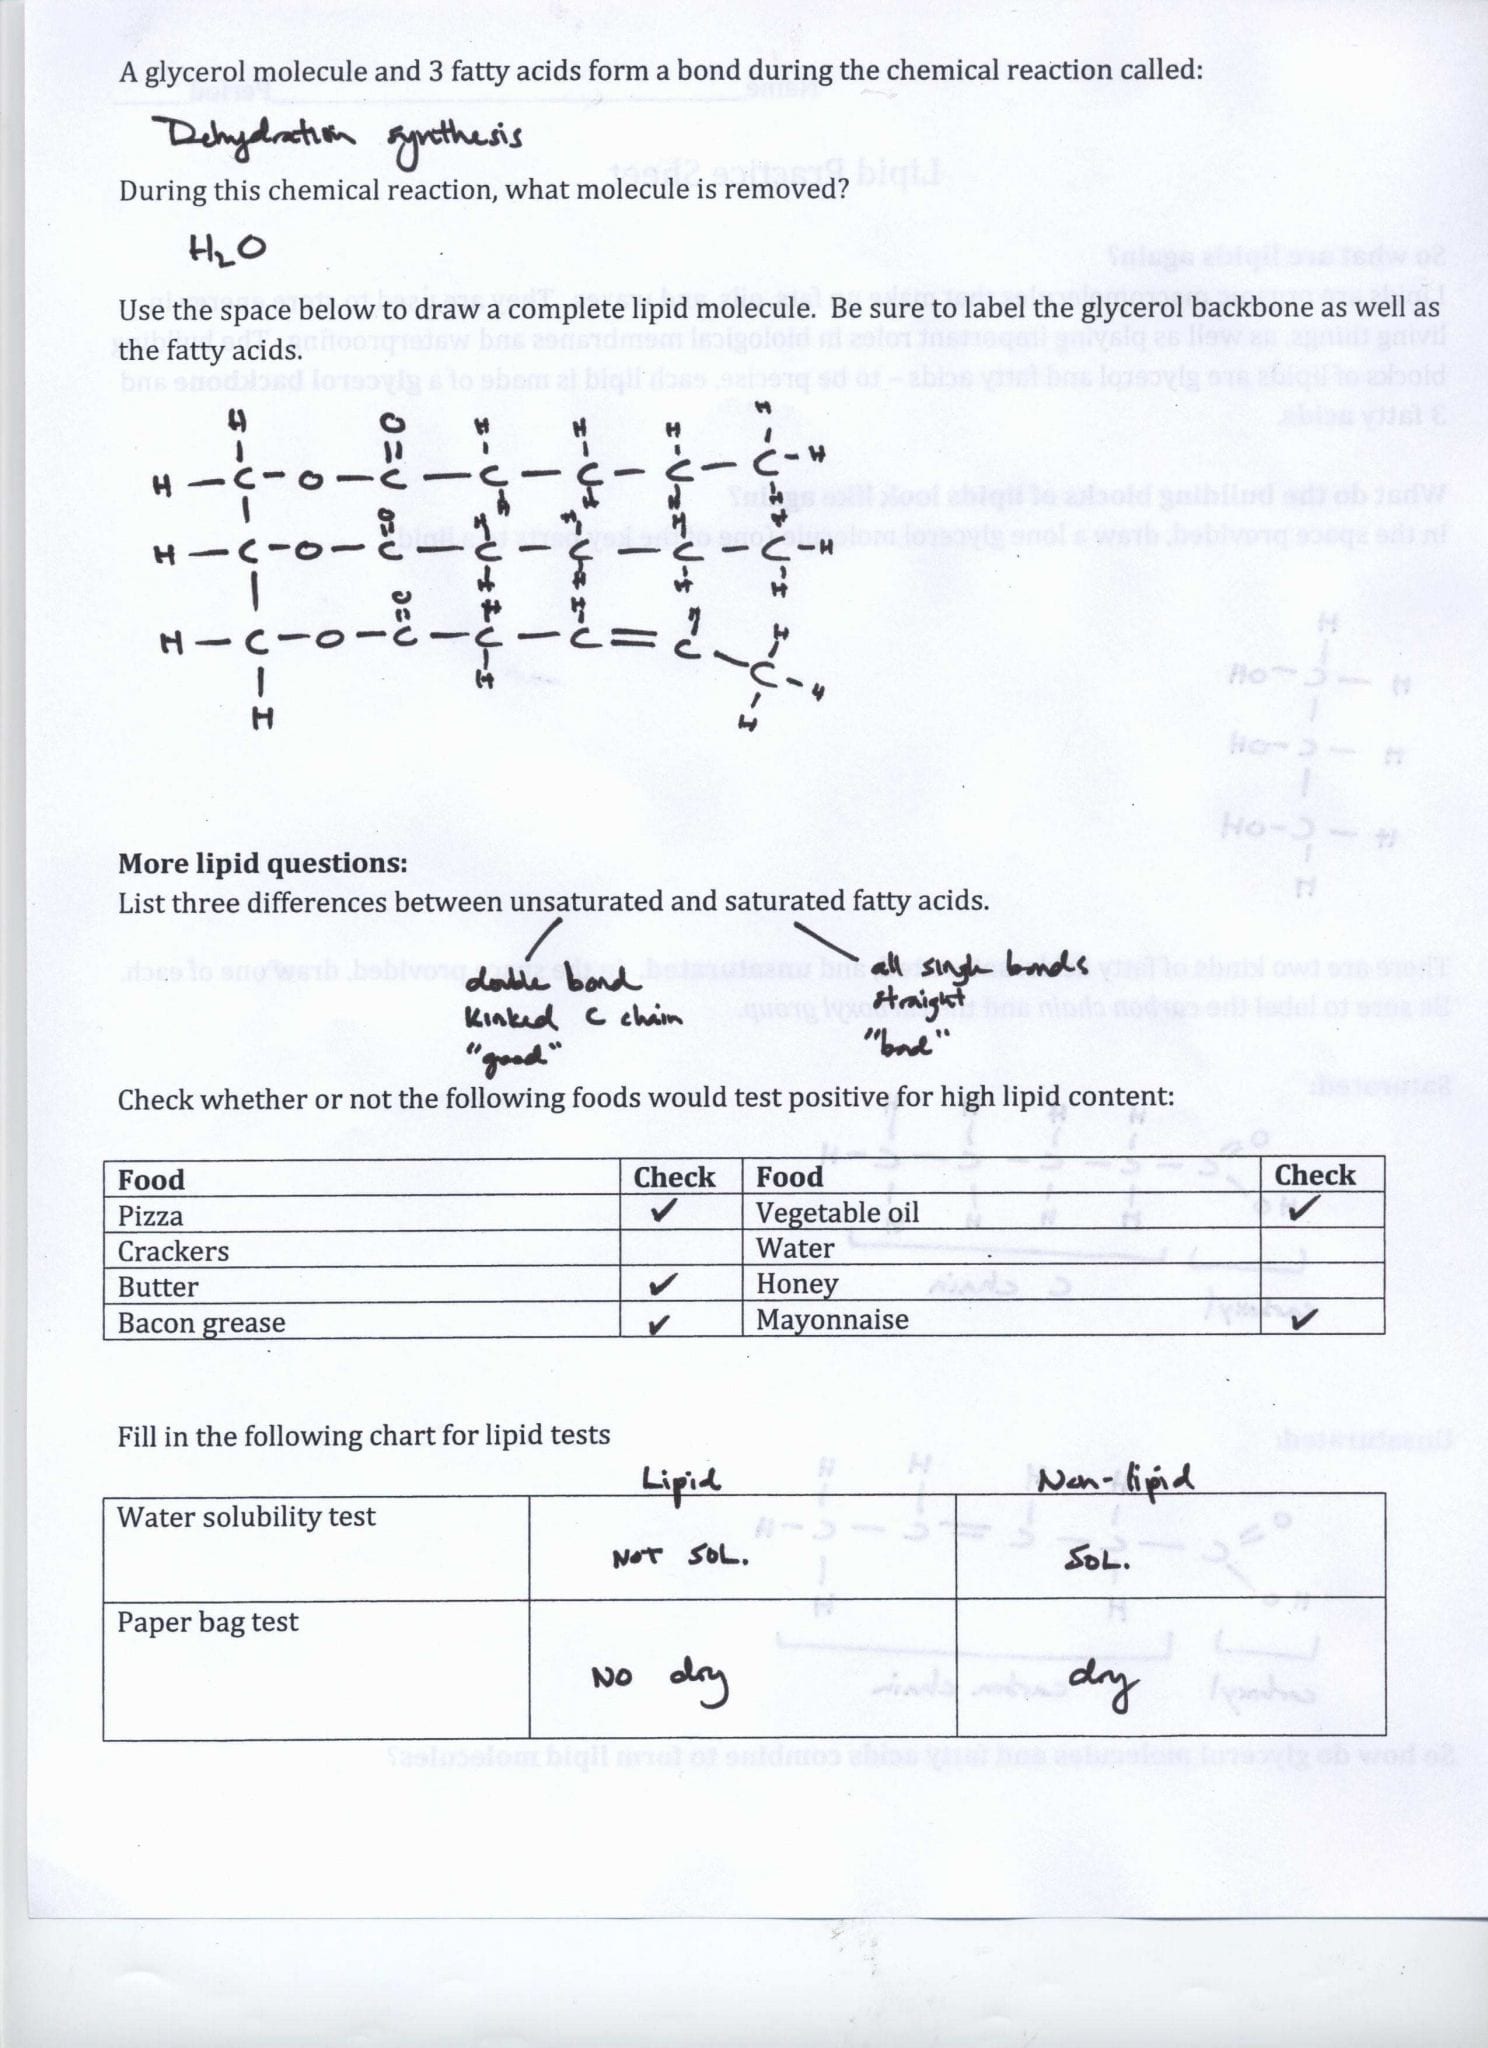 Five Types Of Chemical Reaction Worksheet